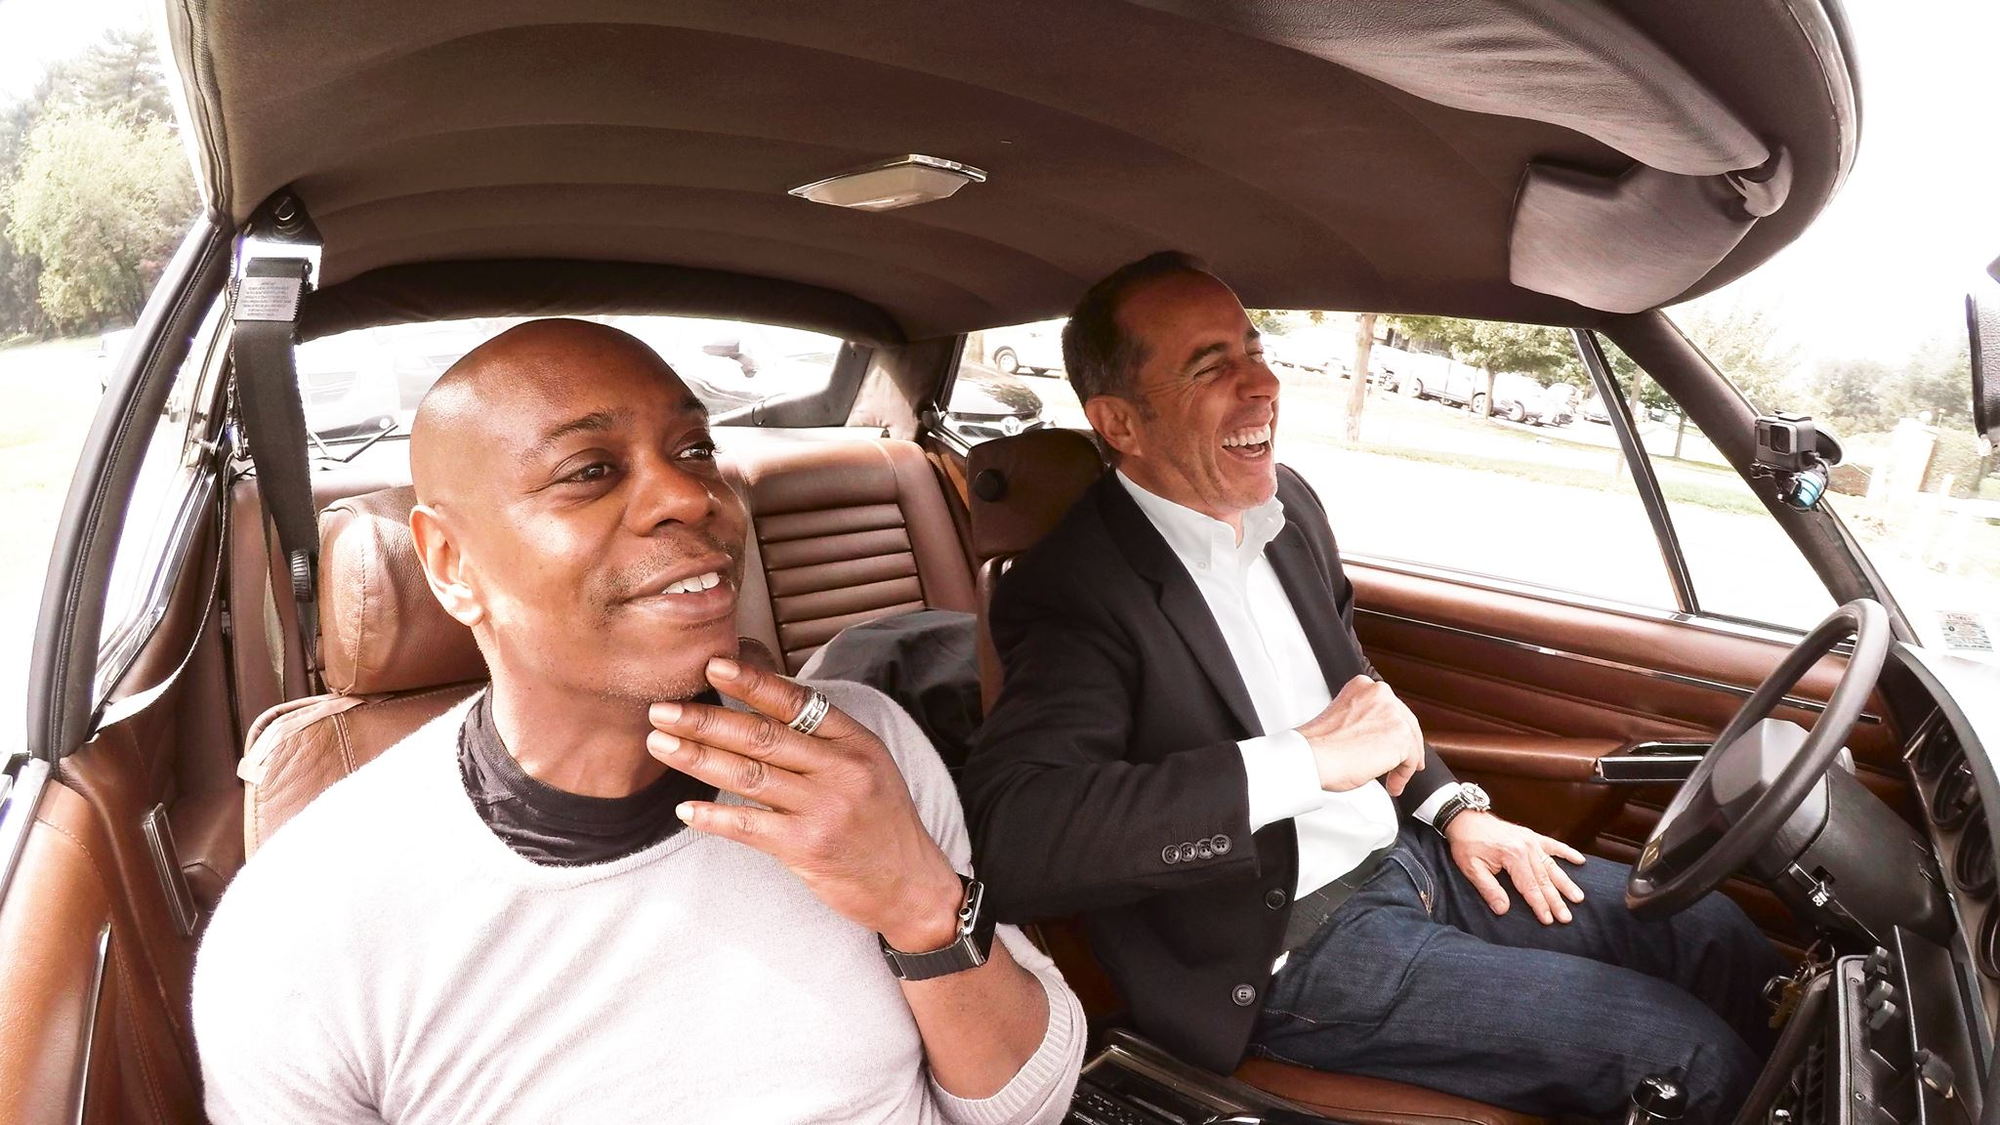 Jerry Seinfeld and Dave Chapelle on Season 6 of Comedians in Cars Getting Coffee